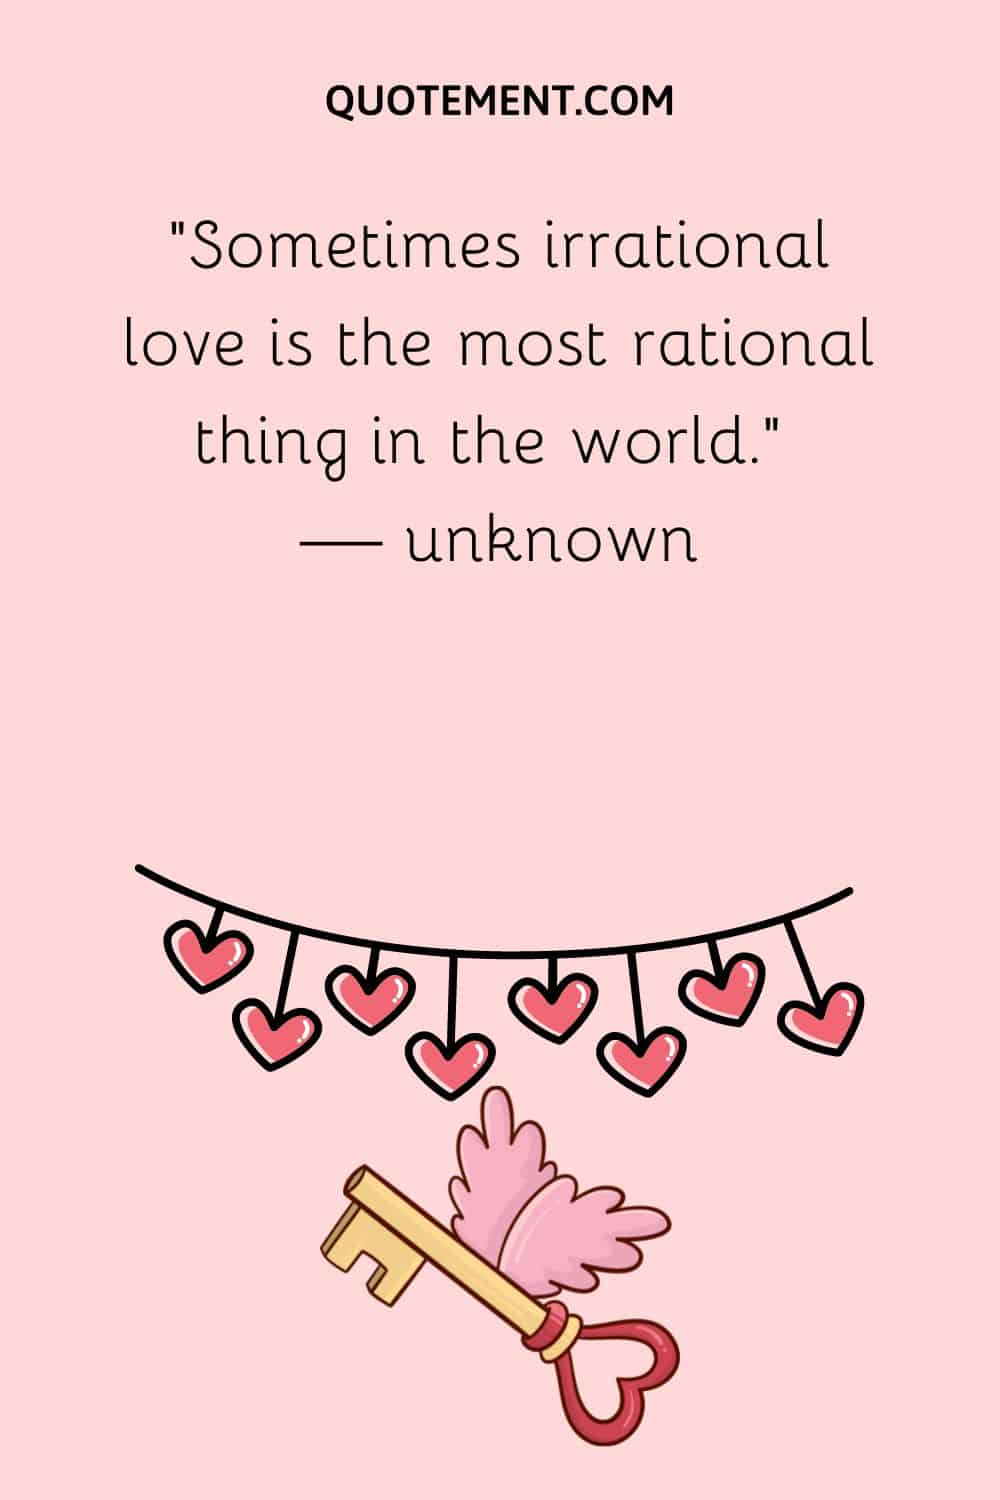 ”Sometimes irrational love is the most rational thing in the world.” — unknown